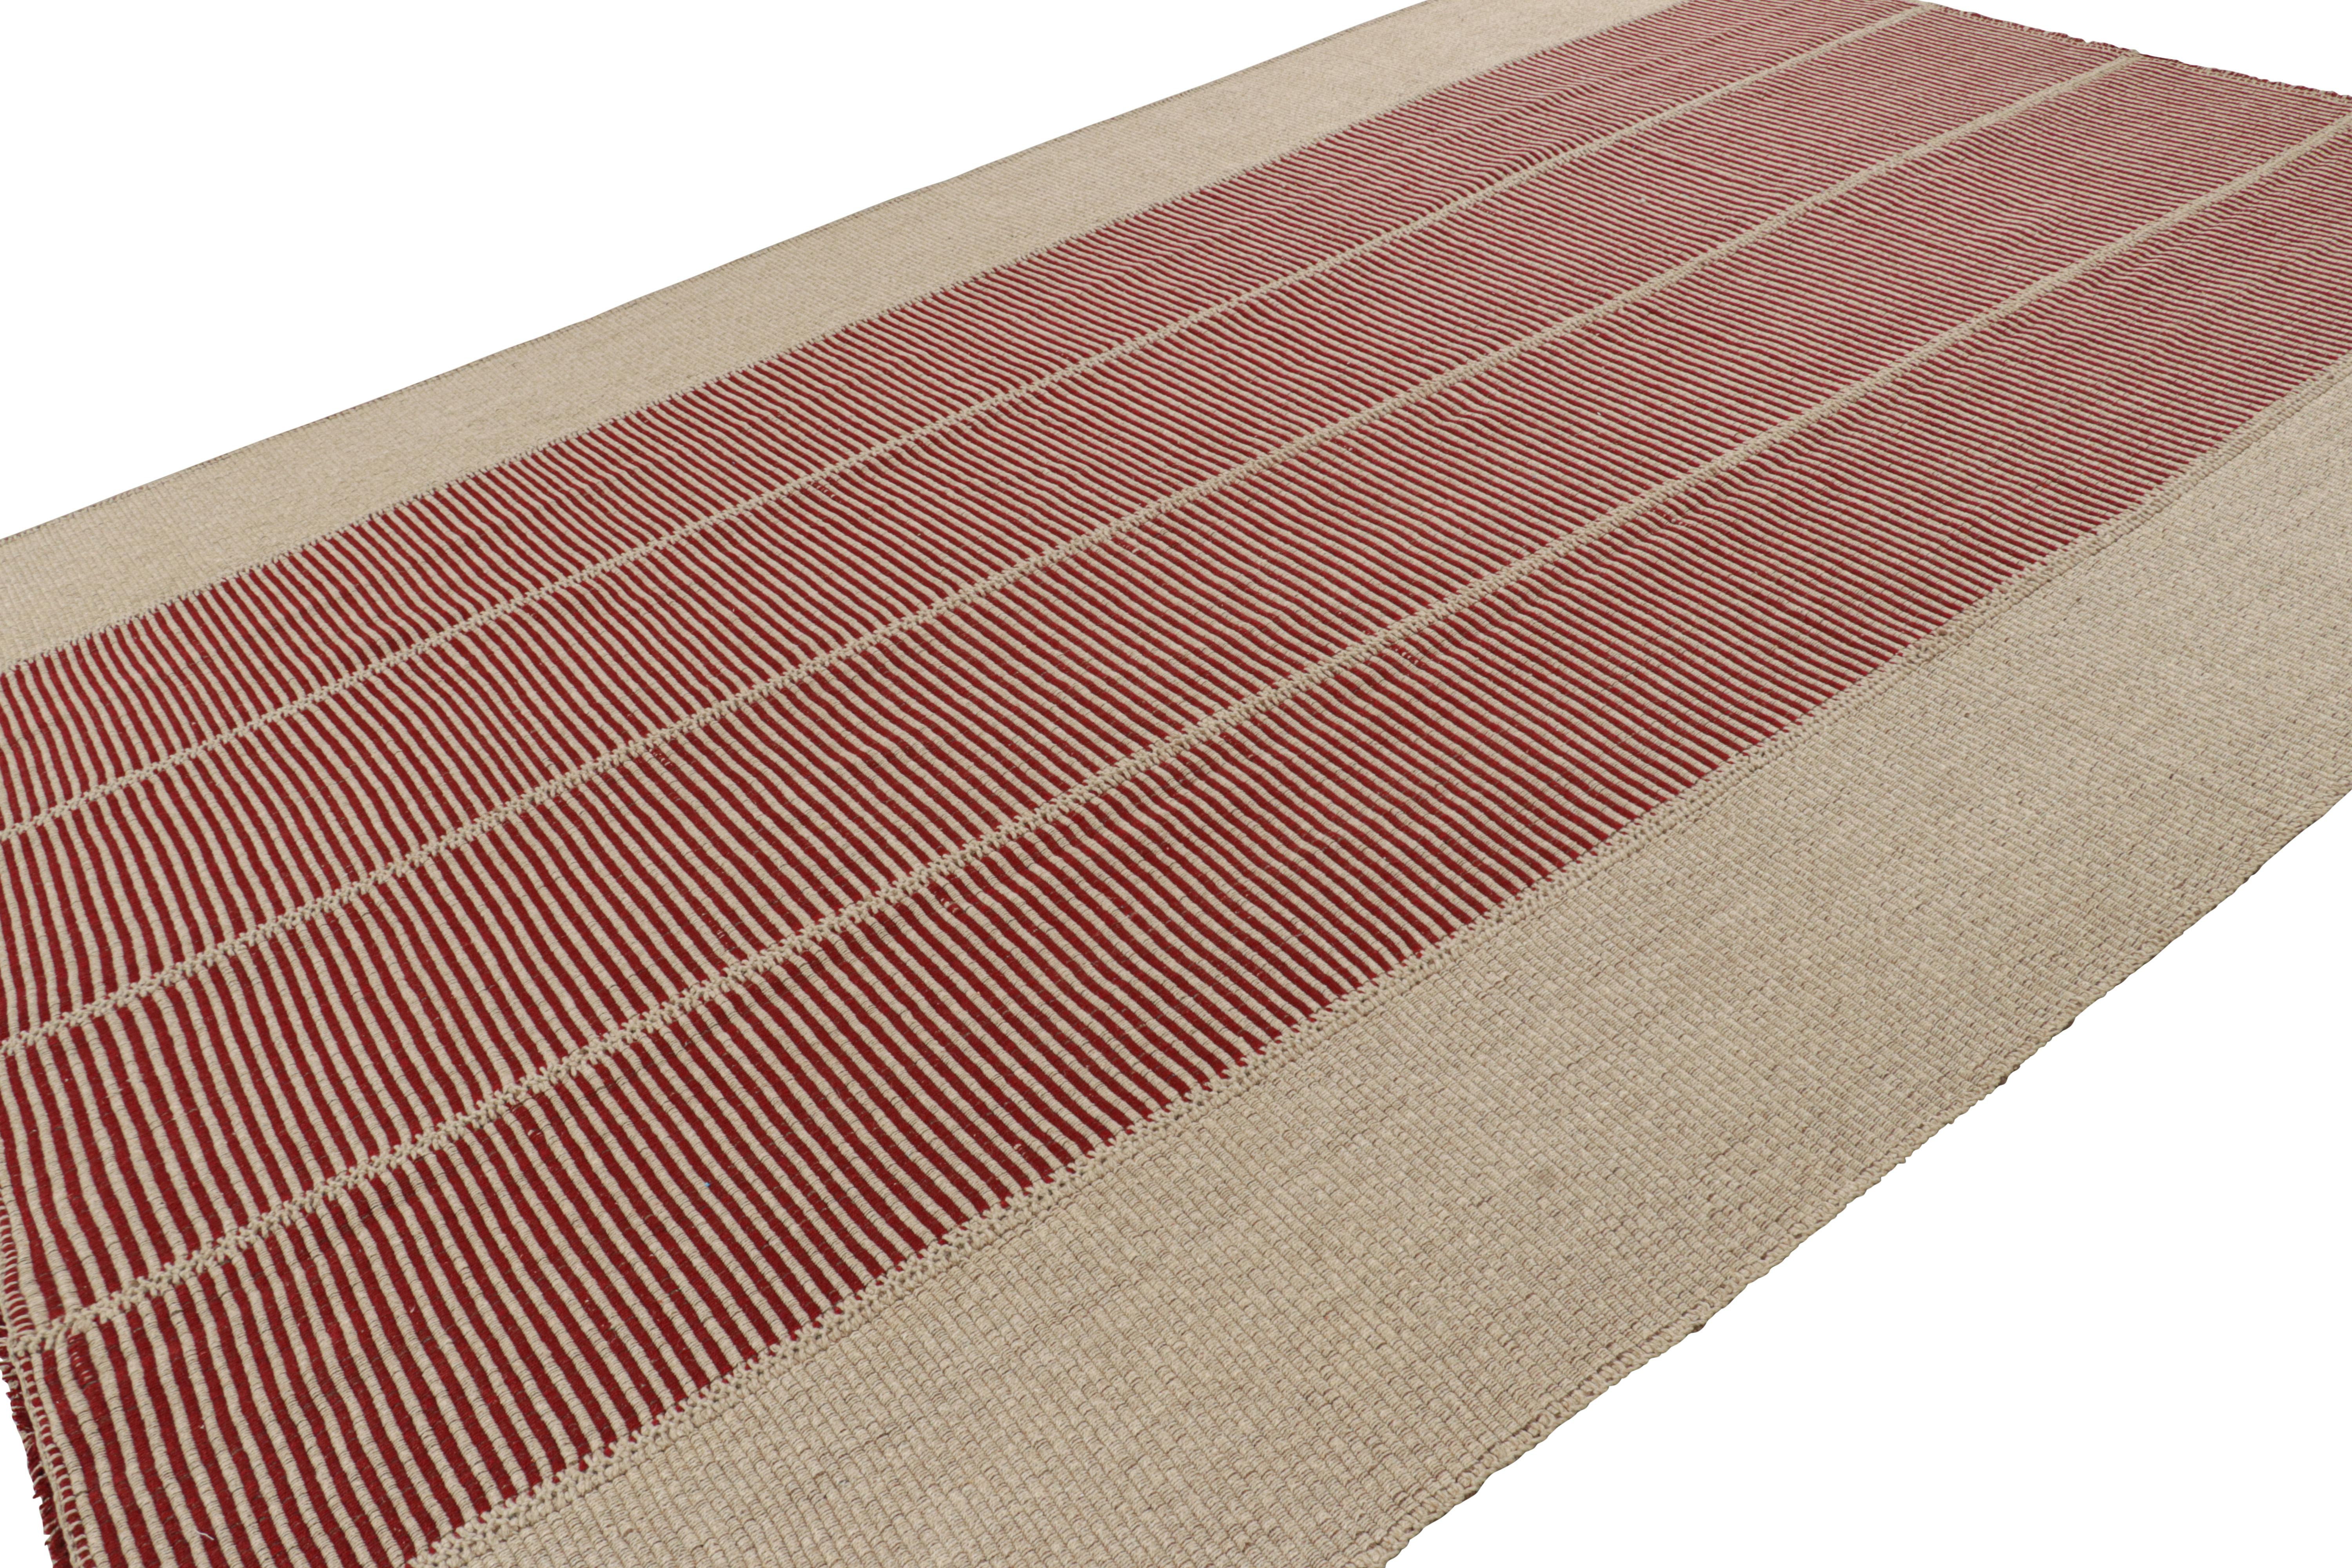 Afghan Rug & Kilim’s Contemporary Kilim in Red and Beige Textural Stripes  For Sale